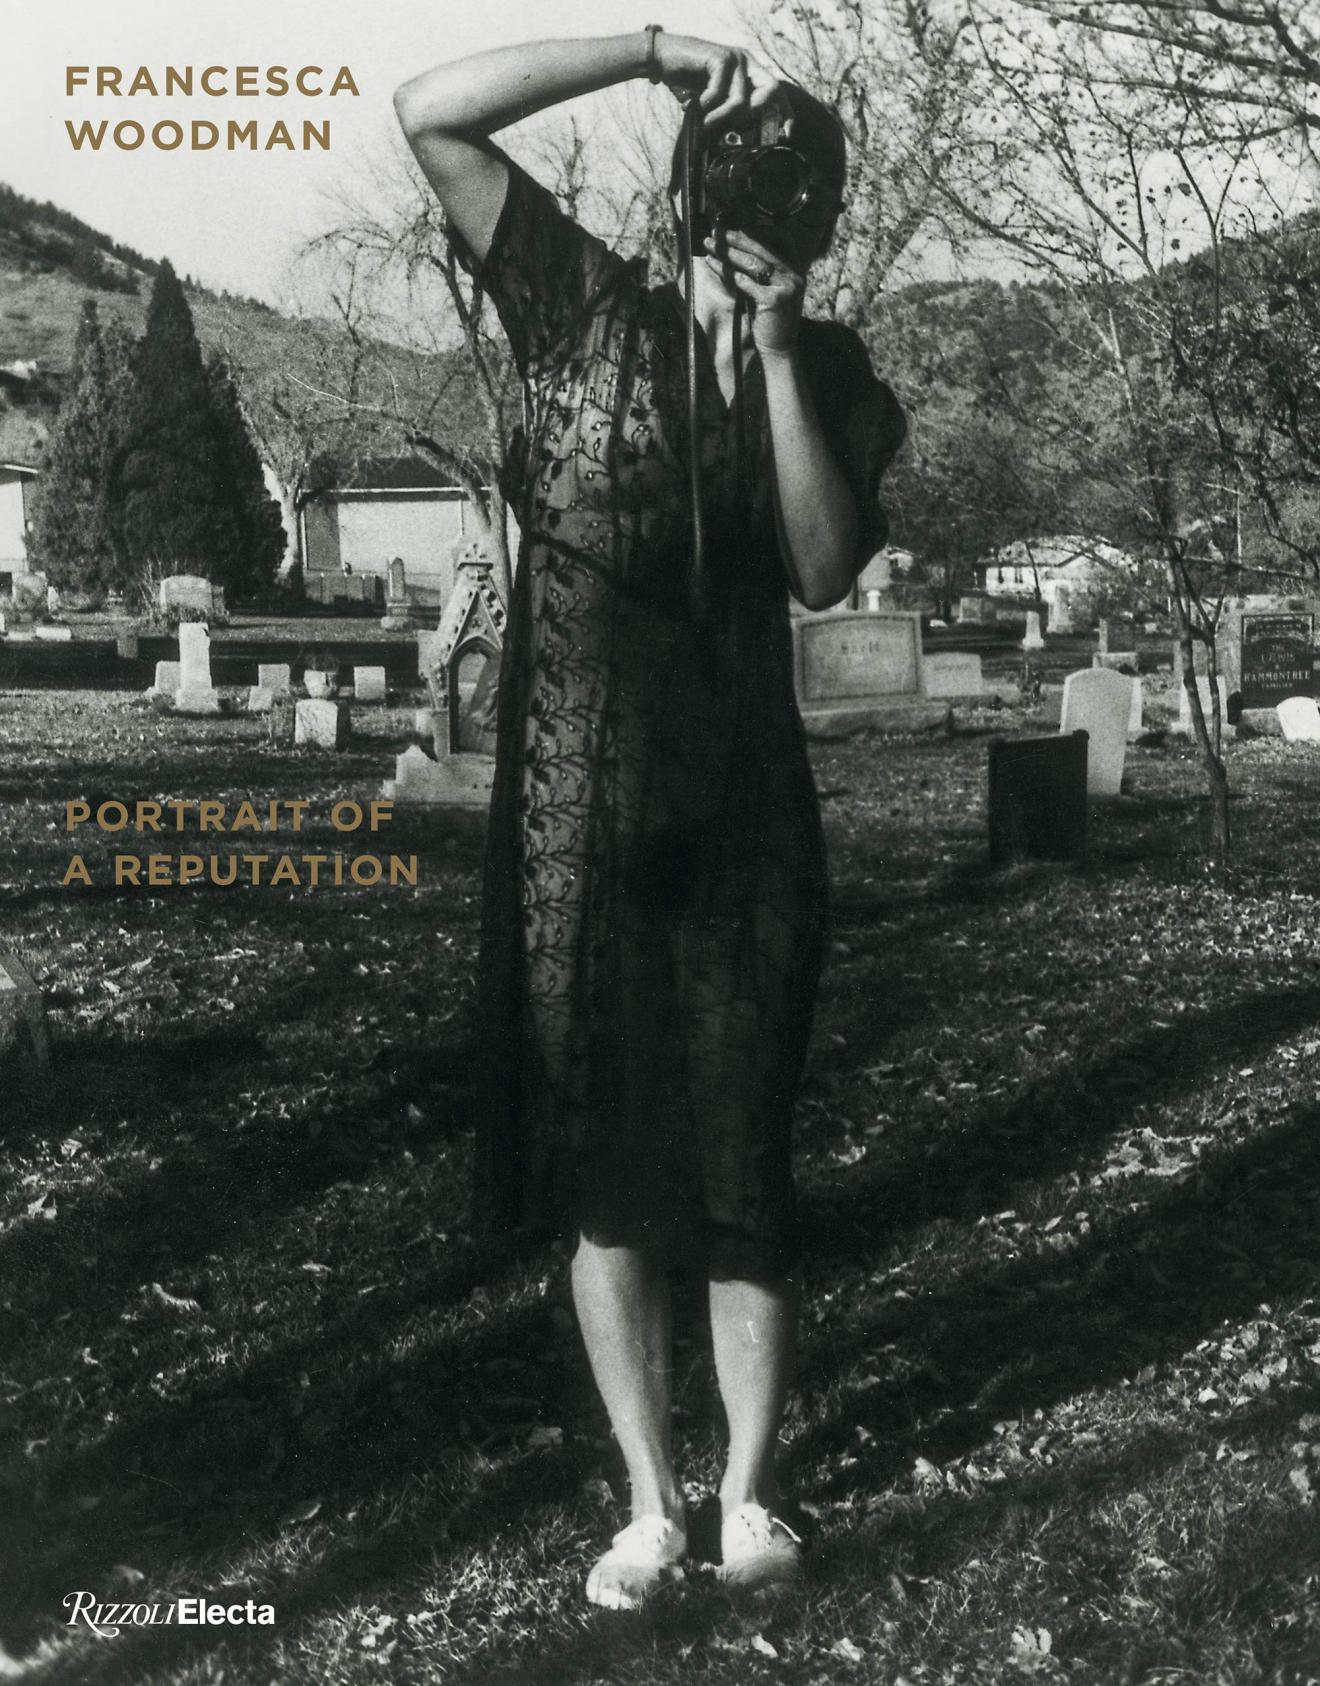 Francesca Woodman: Portrait of a Reputation, Exhibition Catalogue. A woman is standing in a graveyard in a sheer black dress. She is holding a camera up to her face at an angle. 